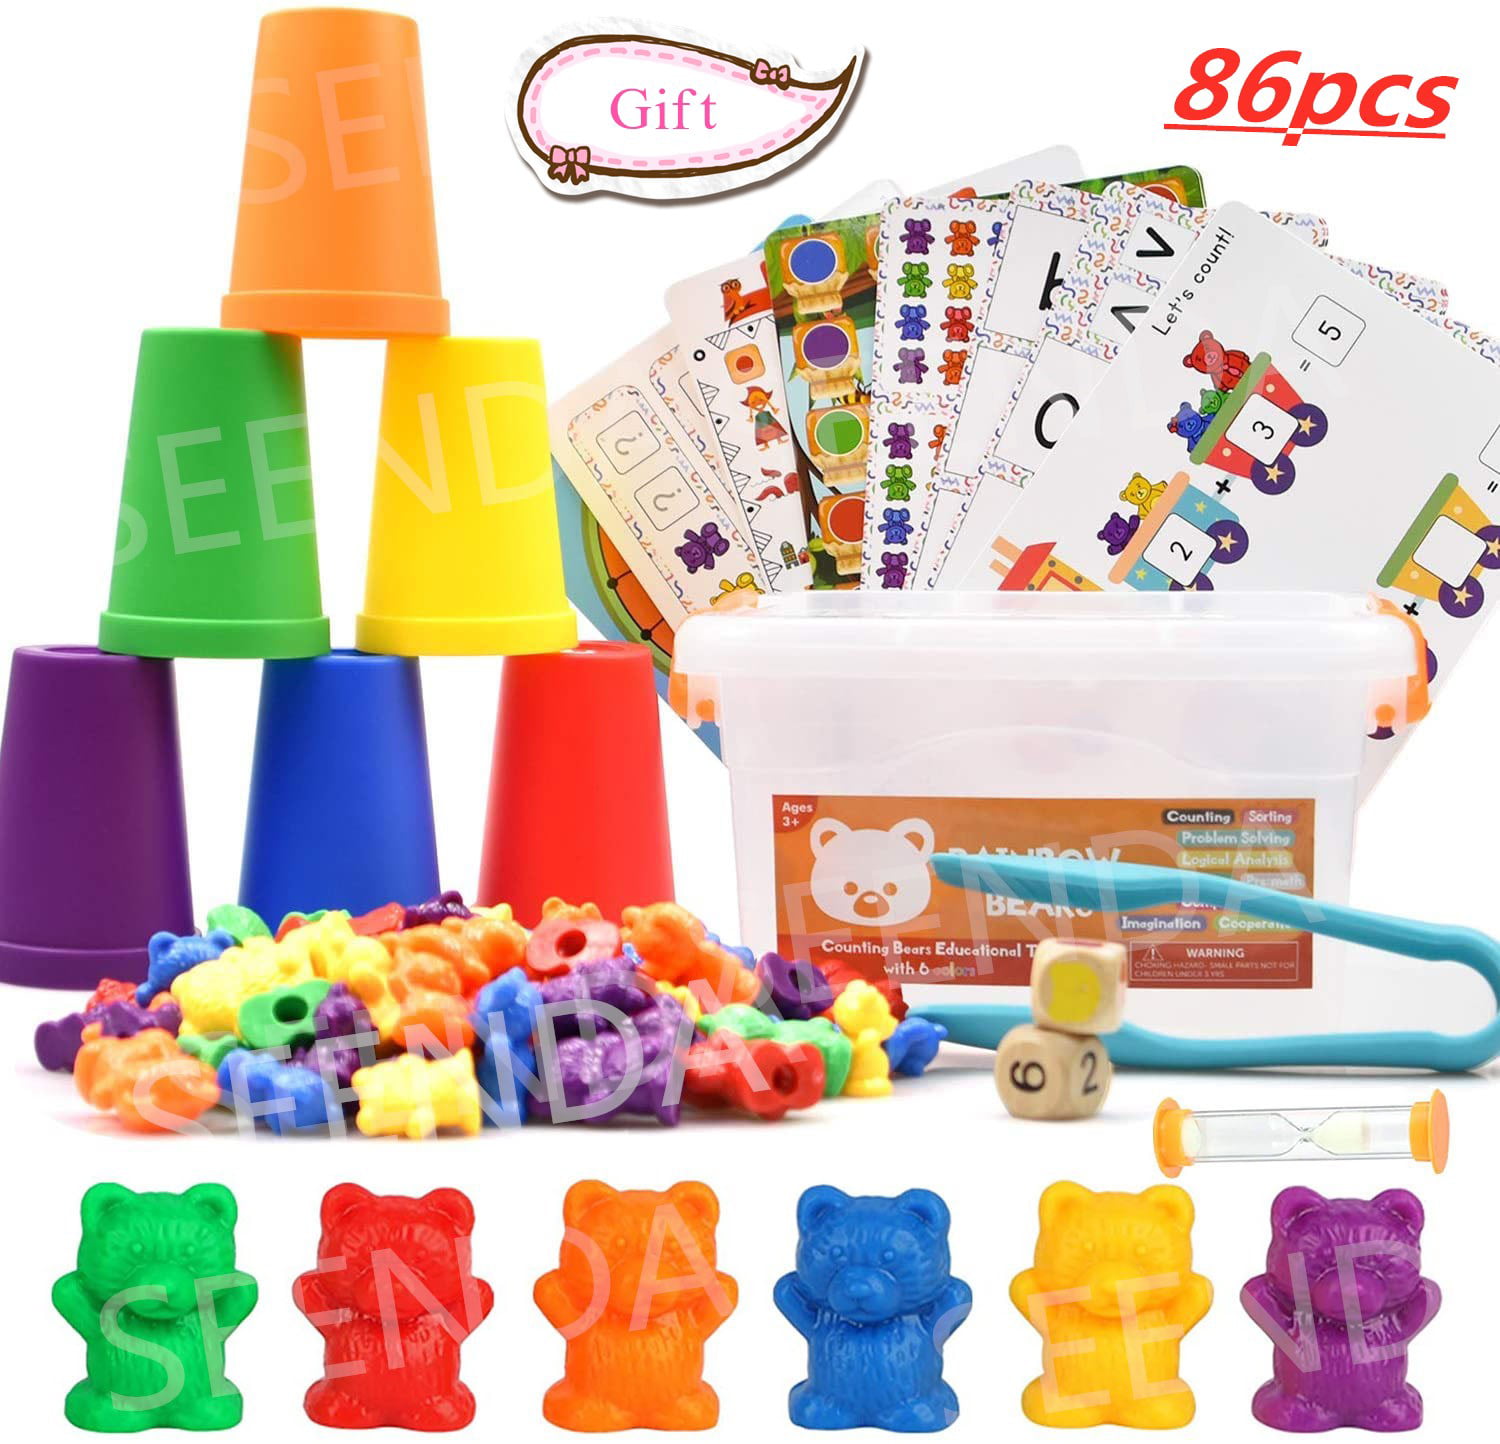 90 Pcs Kids Educational Toy Bears Counting Sorting Toys with Rainbow Cups 